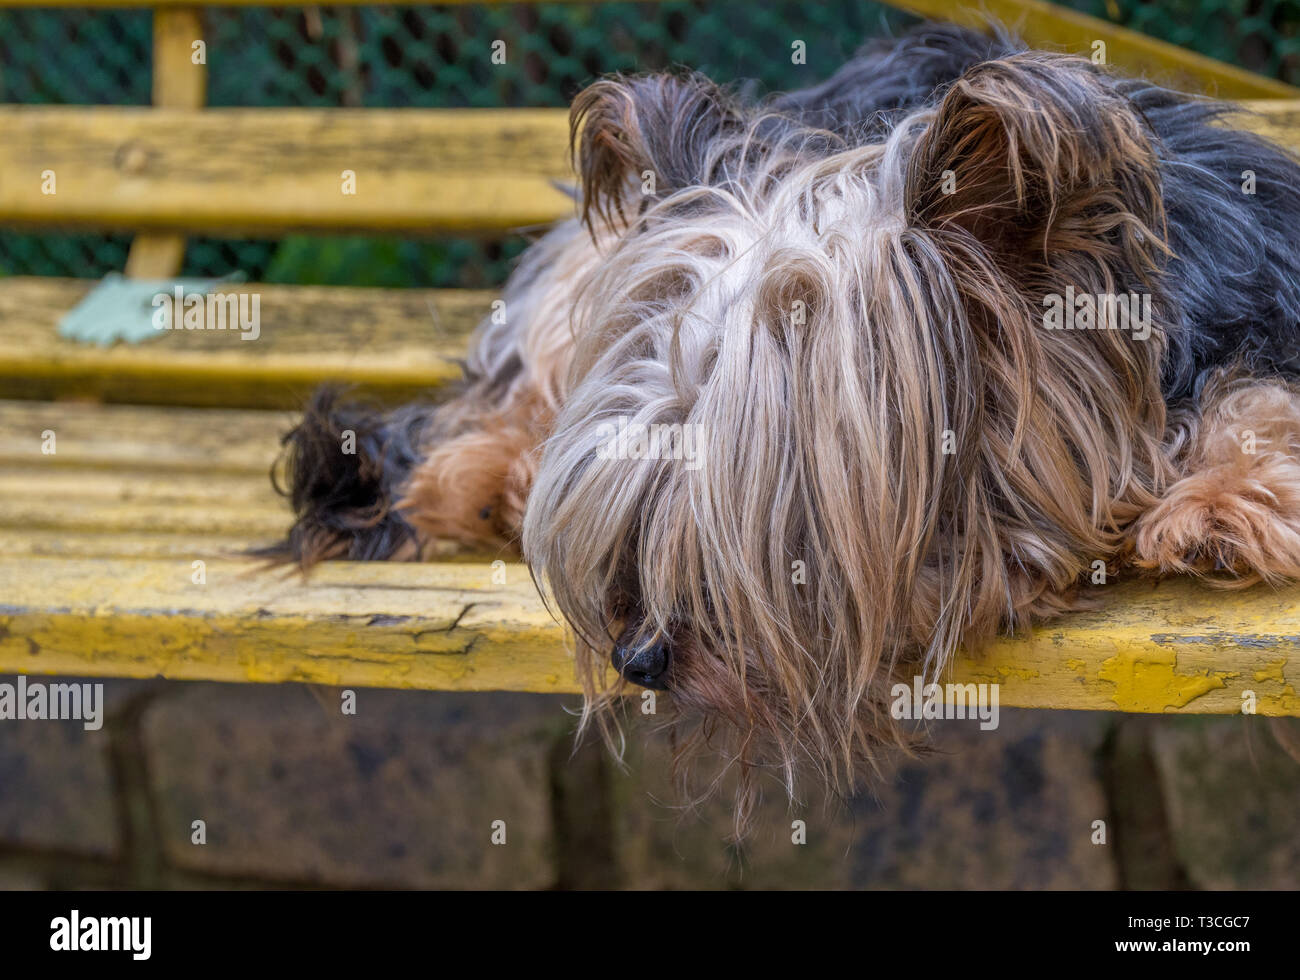 An unkept stray dog sleeps on a yellow park bench image with copy space in landscape format Stock Photo